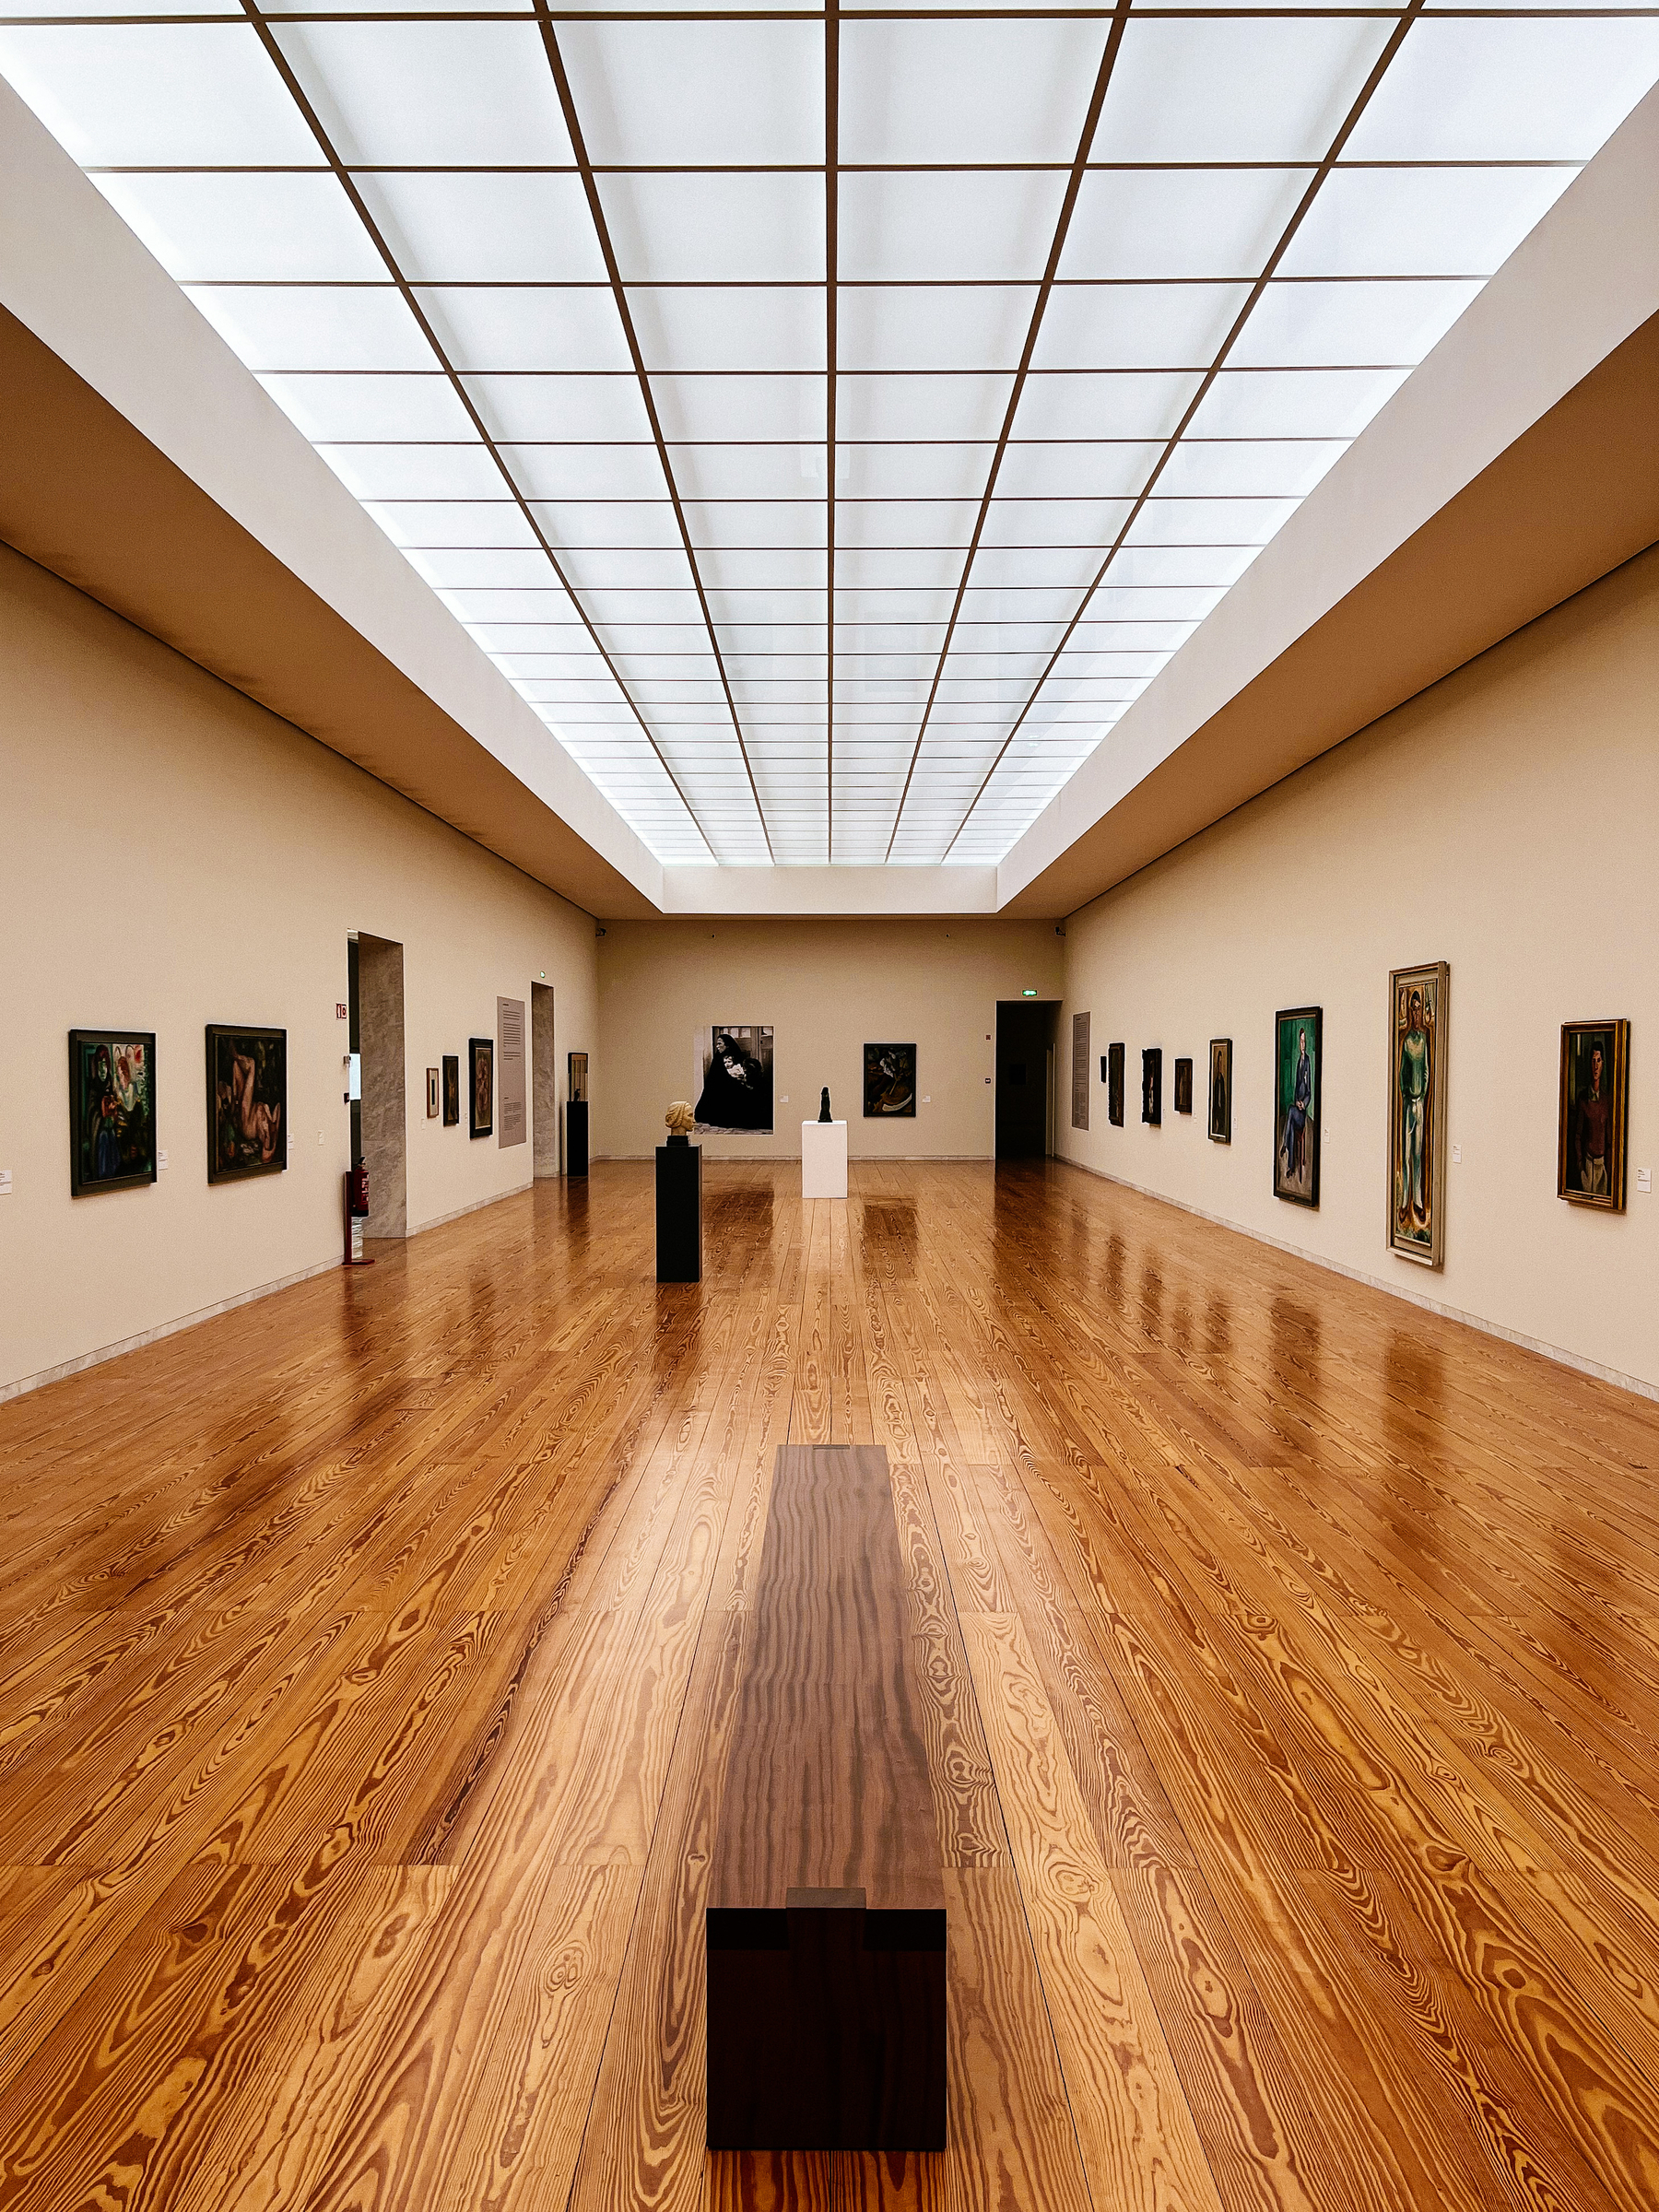 The inside of a museum. Big room, with art on the walls. 